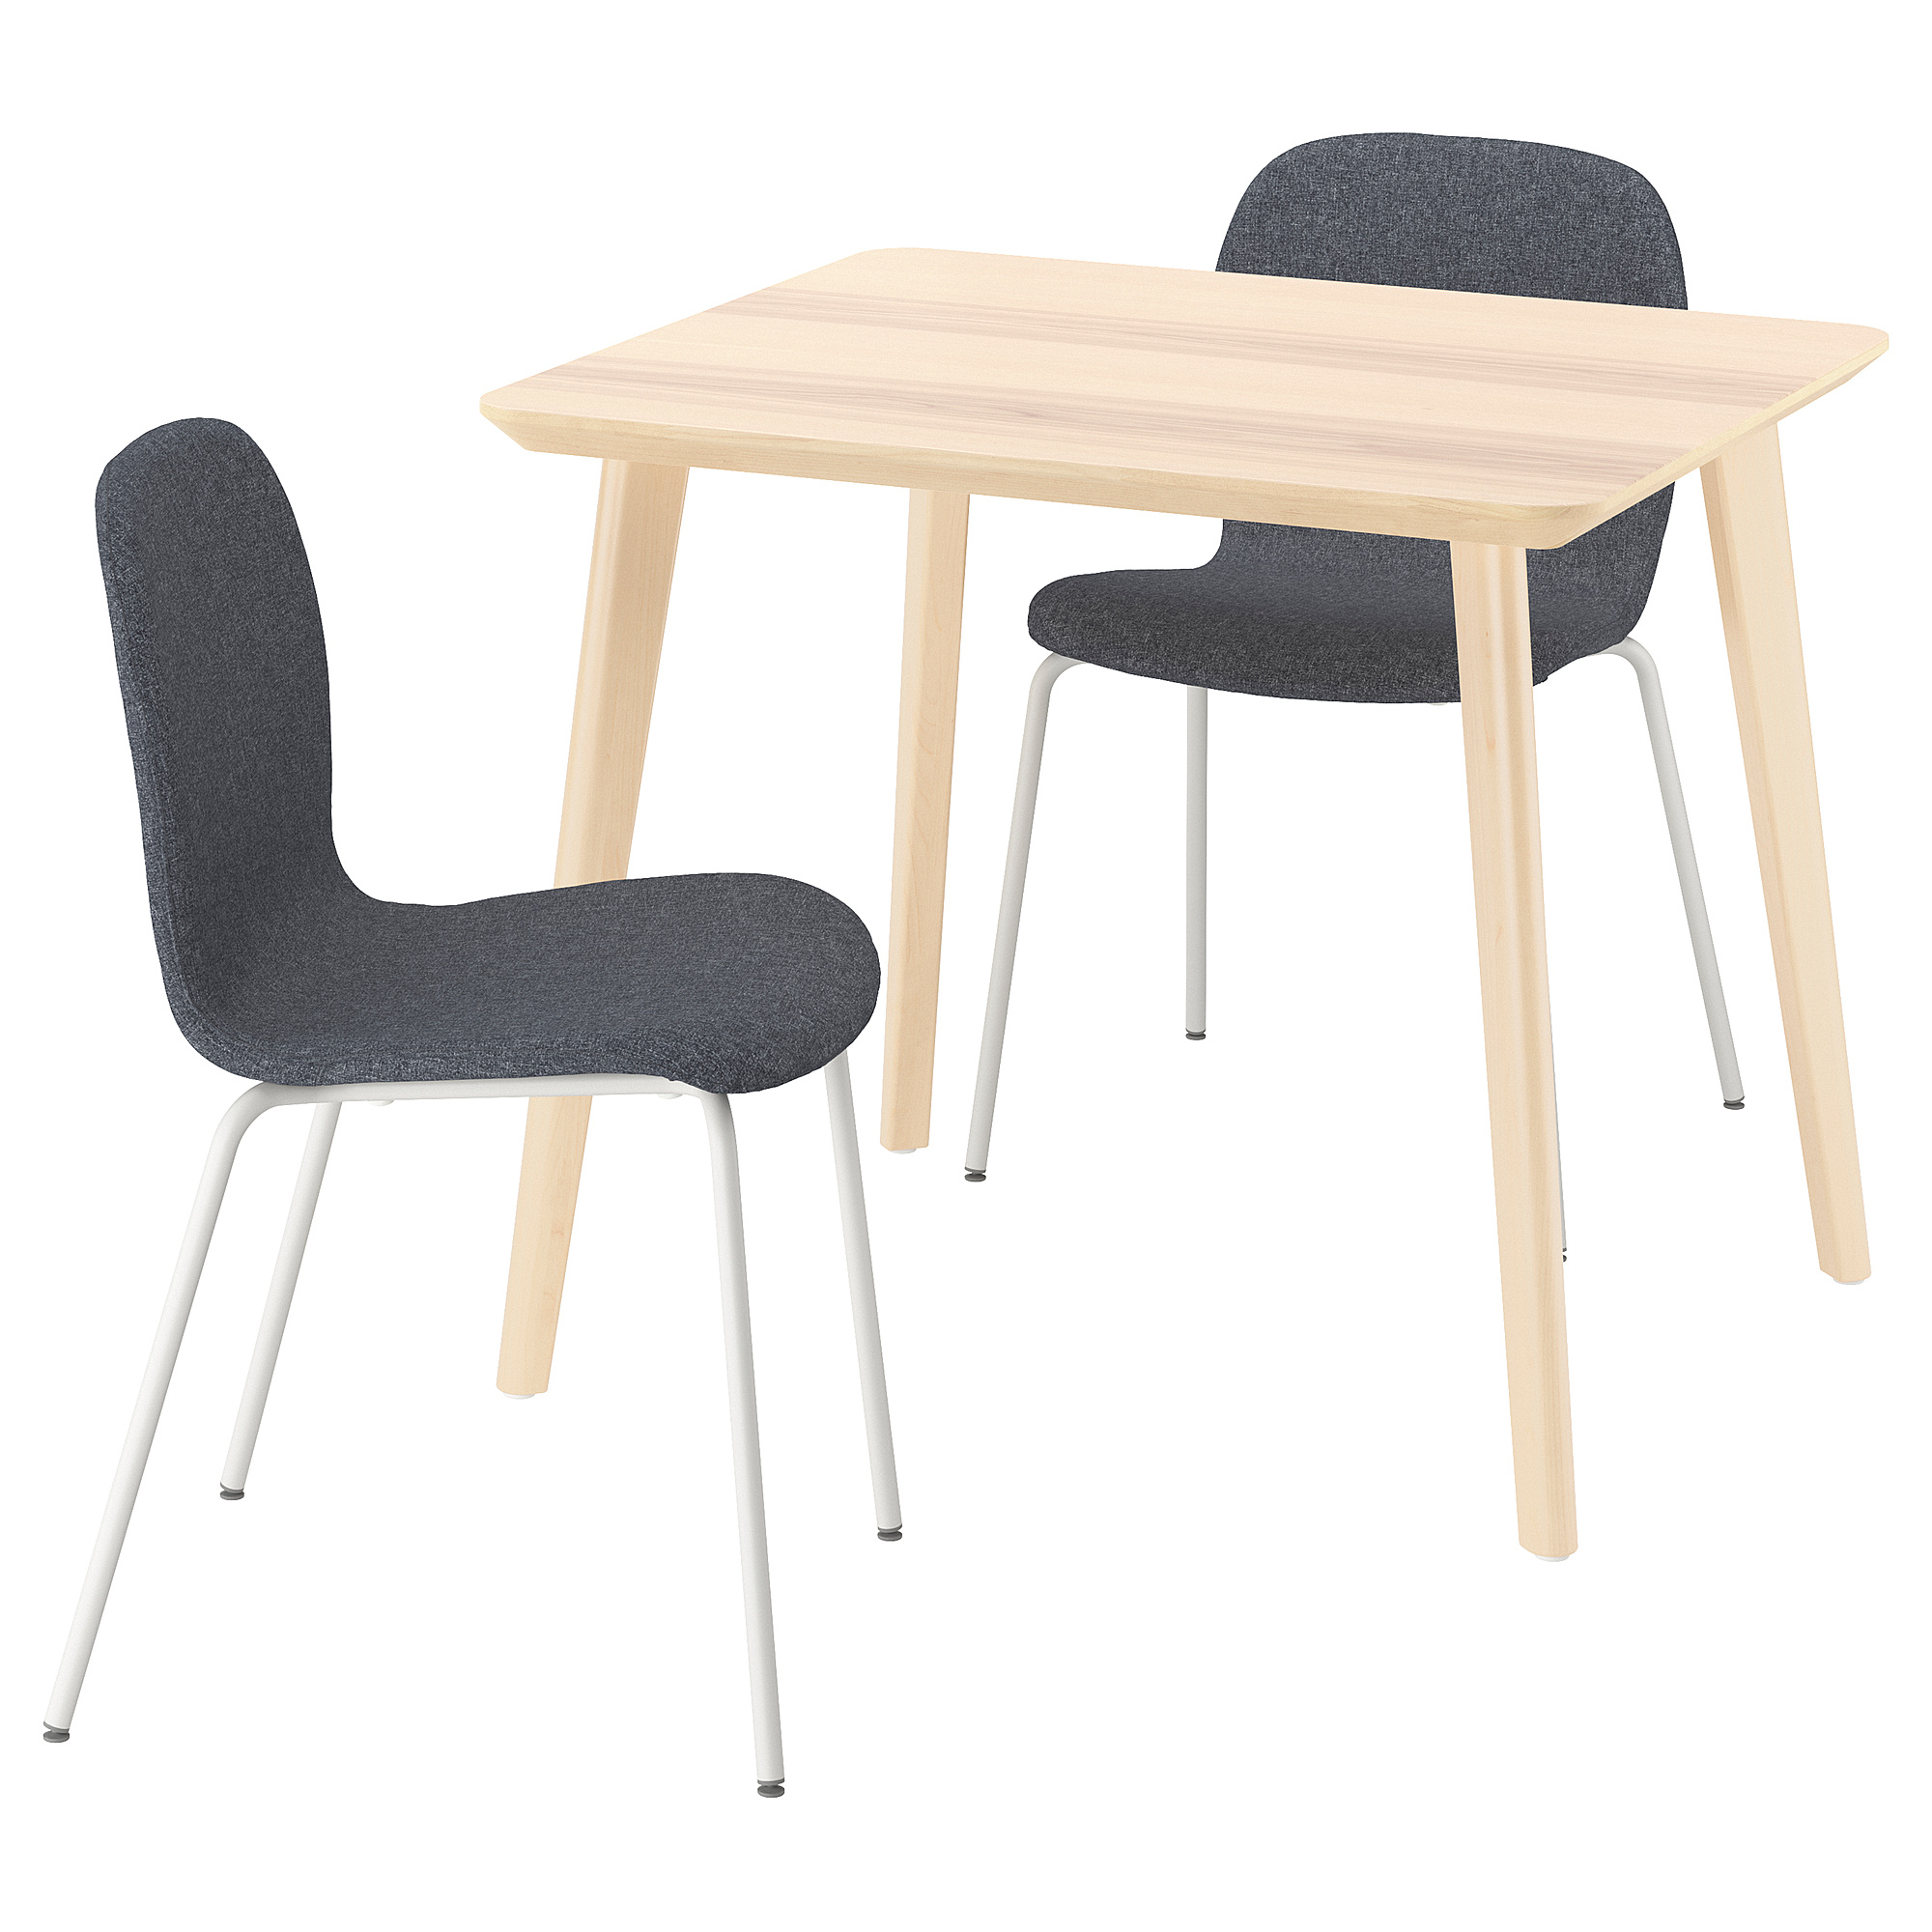 LISABO/KARLPETTER table and 2 chairs